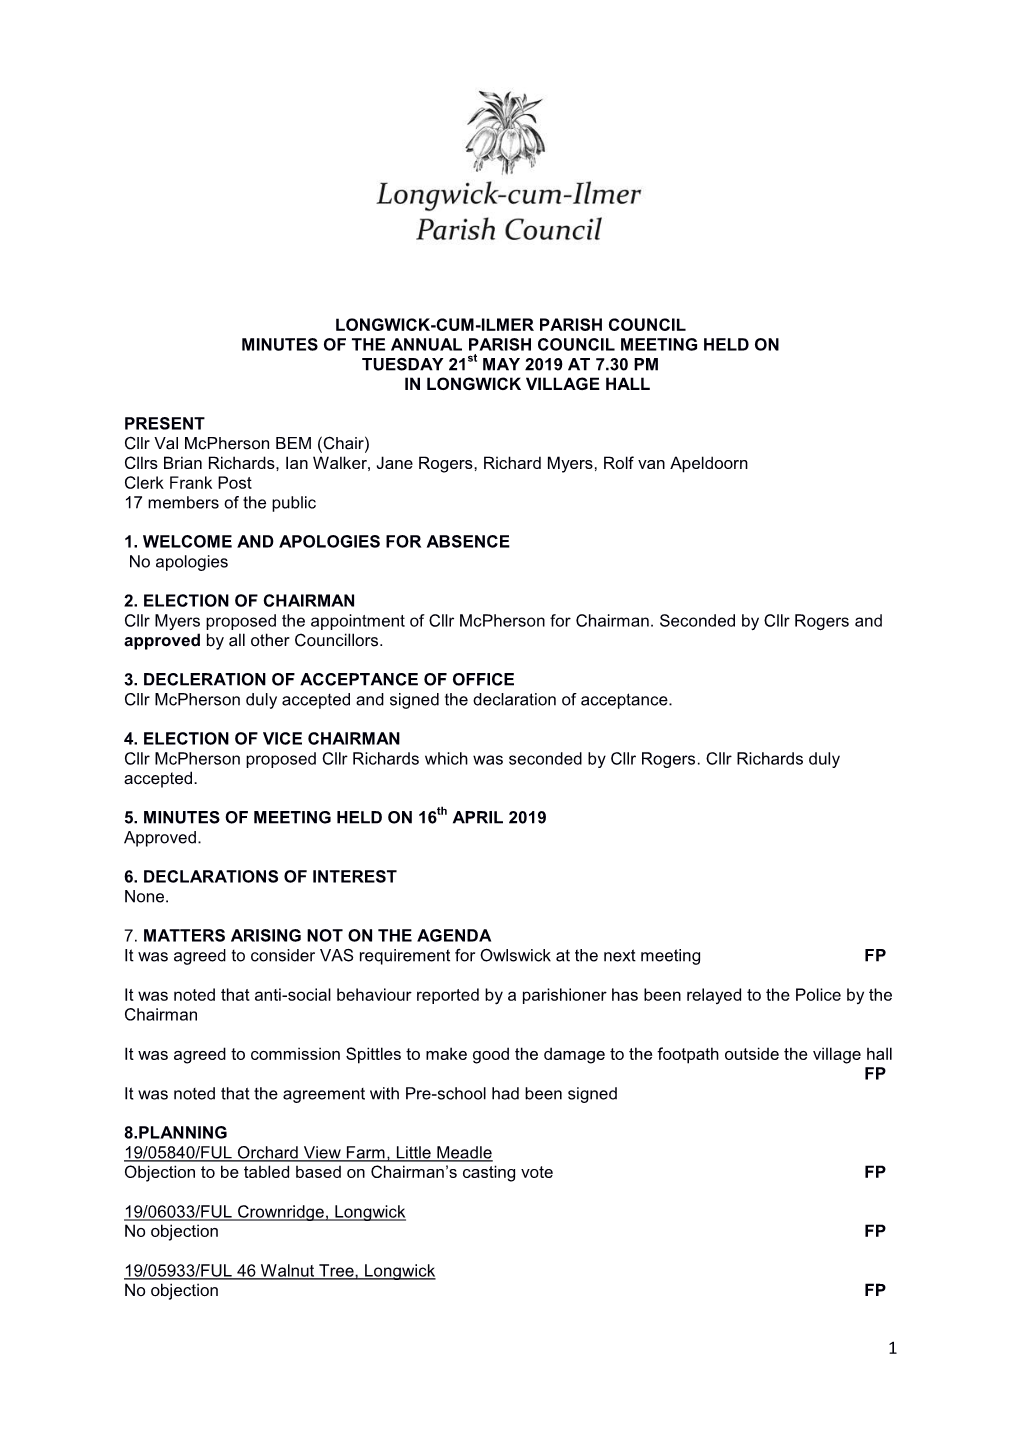 LONGWICK-CUM-ILMER PARISH COUNCIL MINUTES of the ANNUAL PARISH COUNCIL MEETING HELD on TUESDAY 21St MAY 2019 at 7.30 PM in LONGWICK VILLAGE HALL